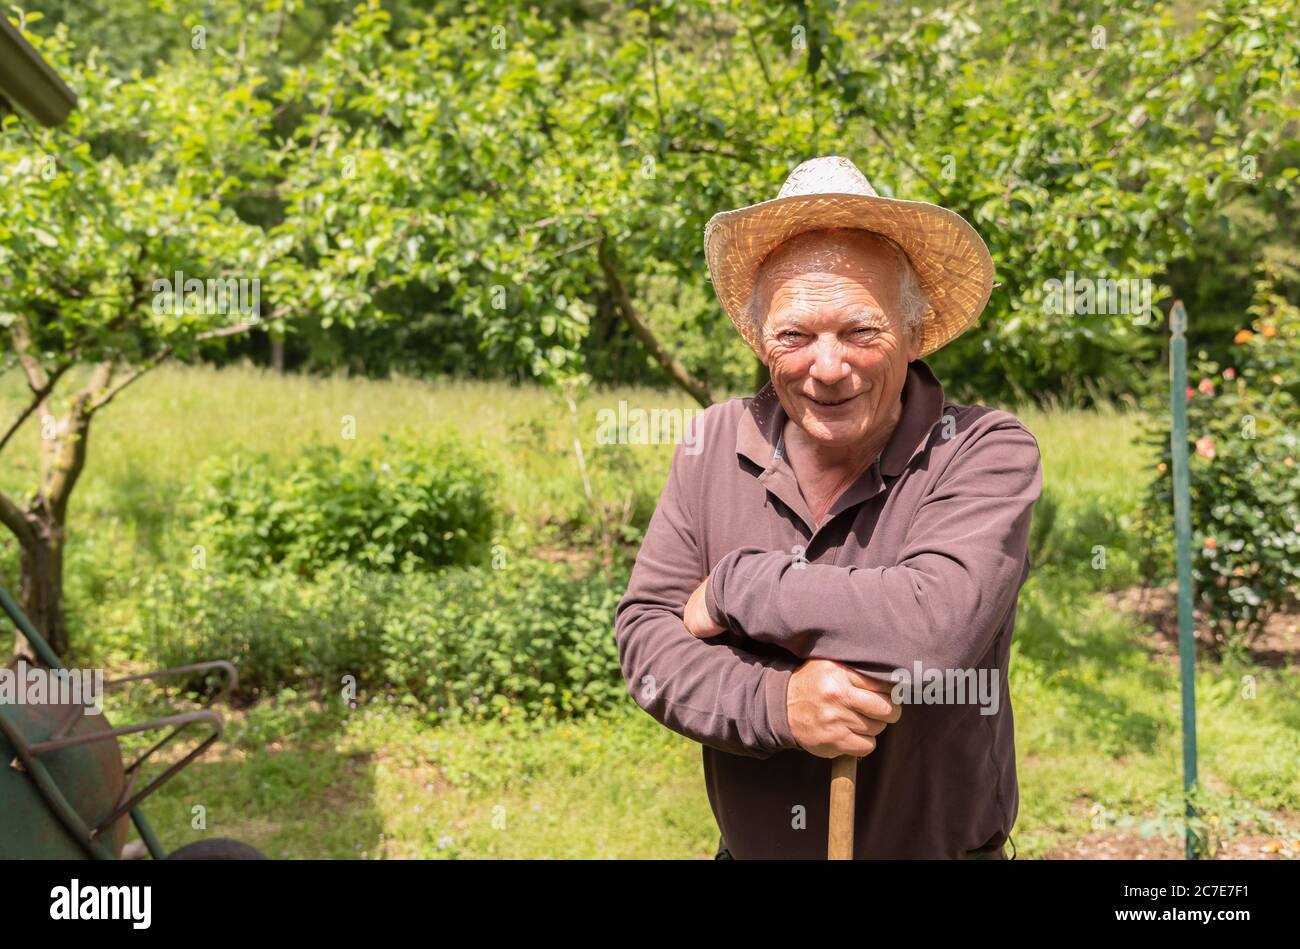 Portrait of smiling Elderly man wearing a hat in the his vegetable garden in springtime. Stock Photo